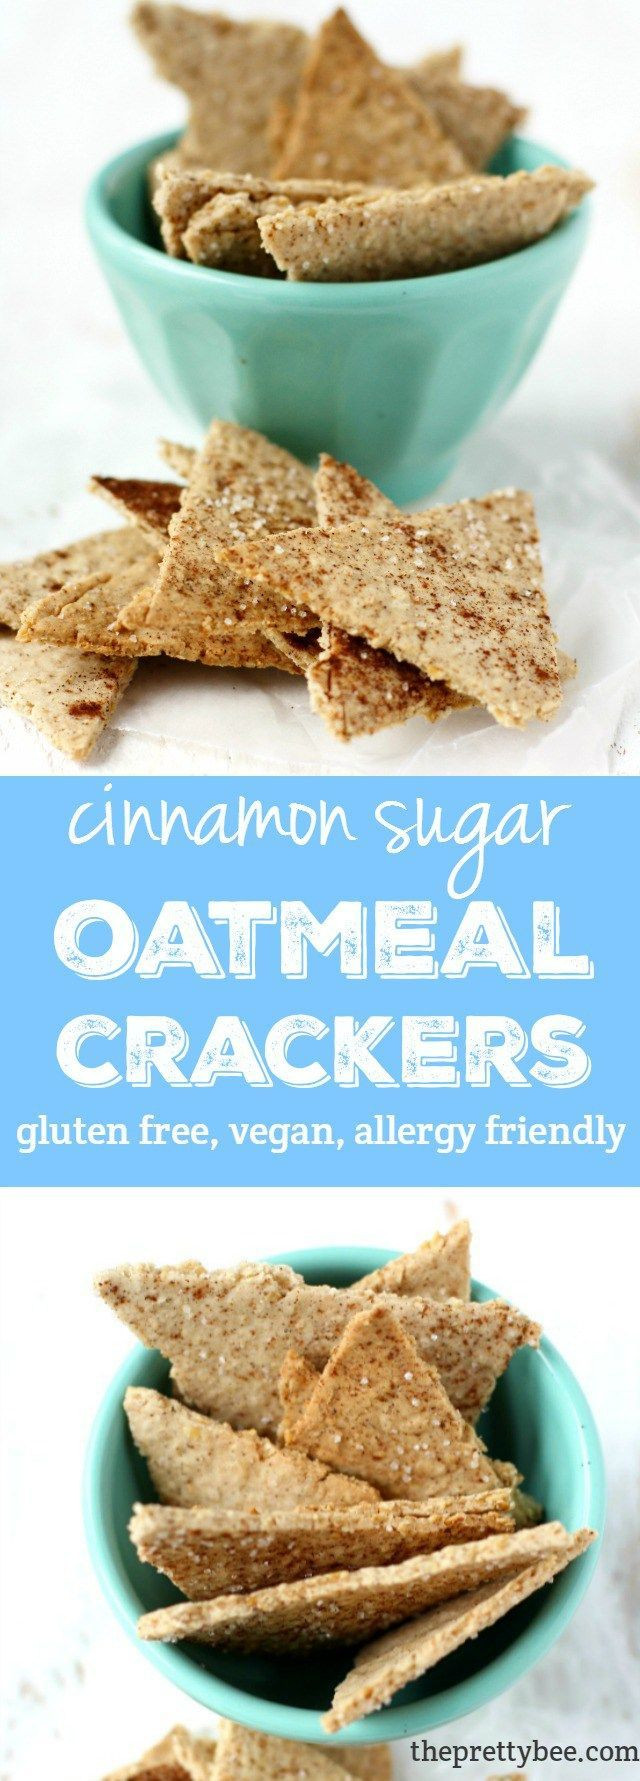 Healthy Crackers Recipe
 25 best ideas about Healthy Crackers on Pinterest